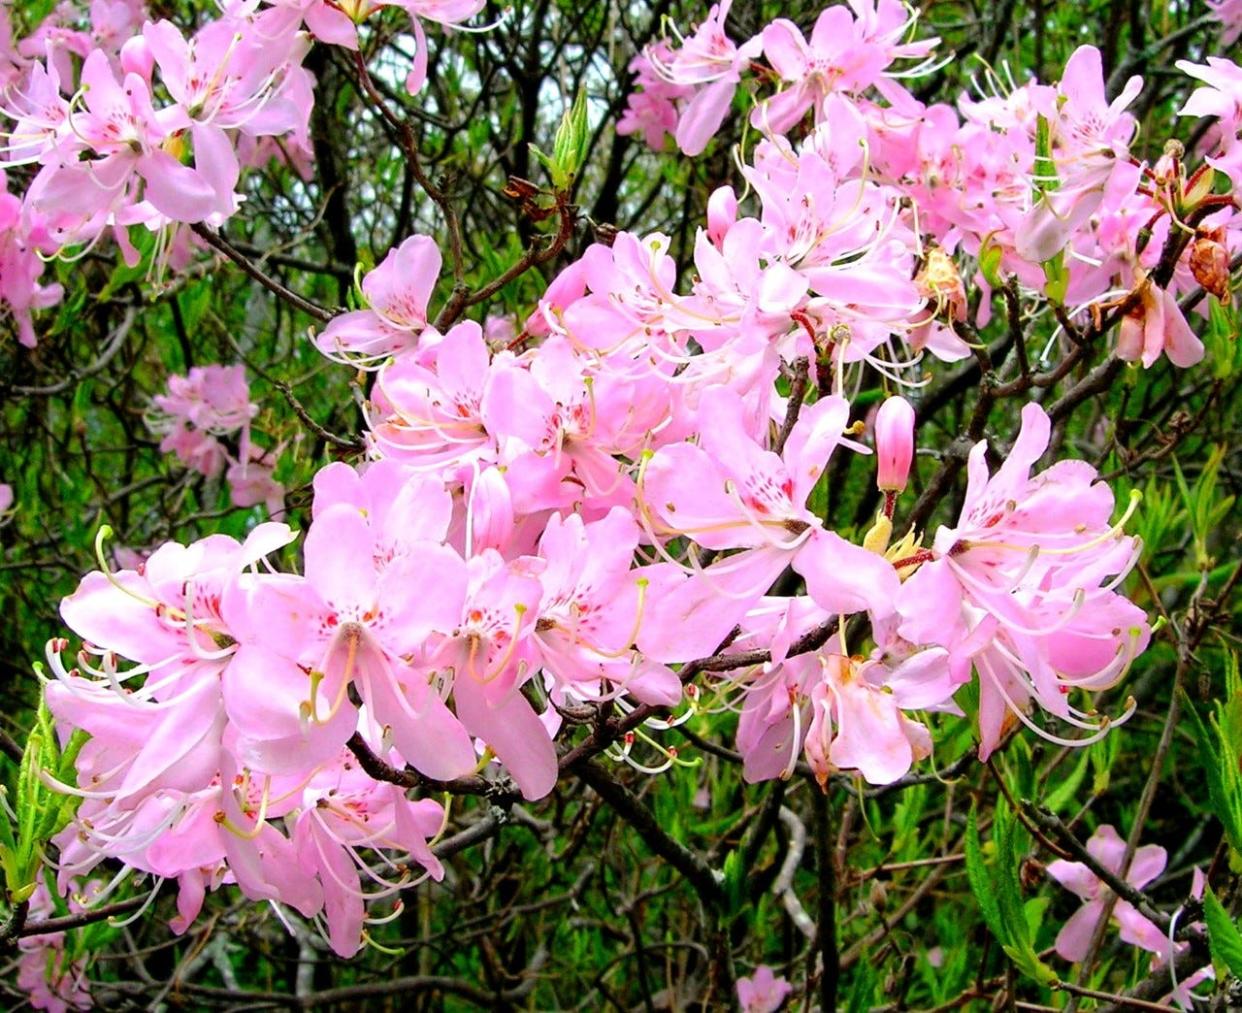 The pinkshell azalea is a deciduous shrub that is easily grown in gardens. It is adaptable to many sites, but is probably happiest in partial shade and at least moderately moist soils.